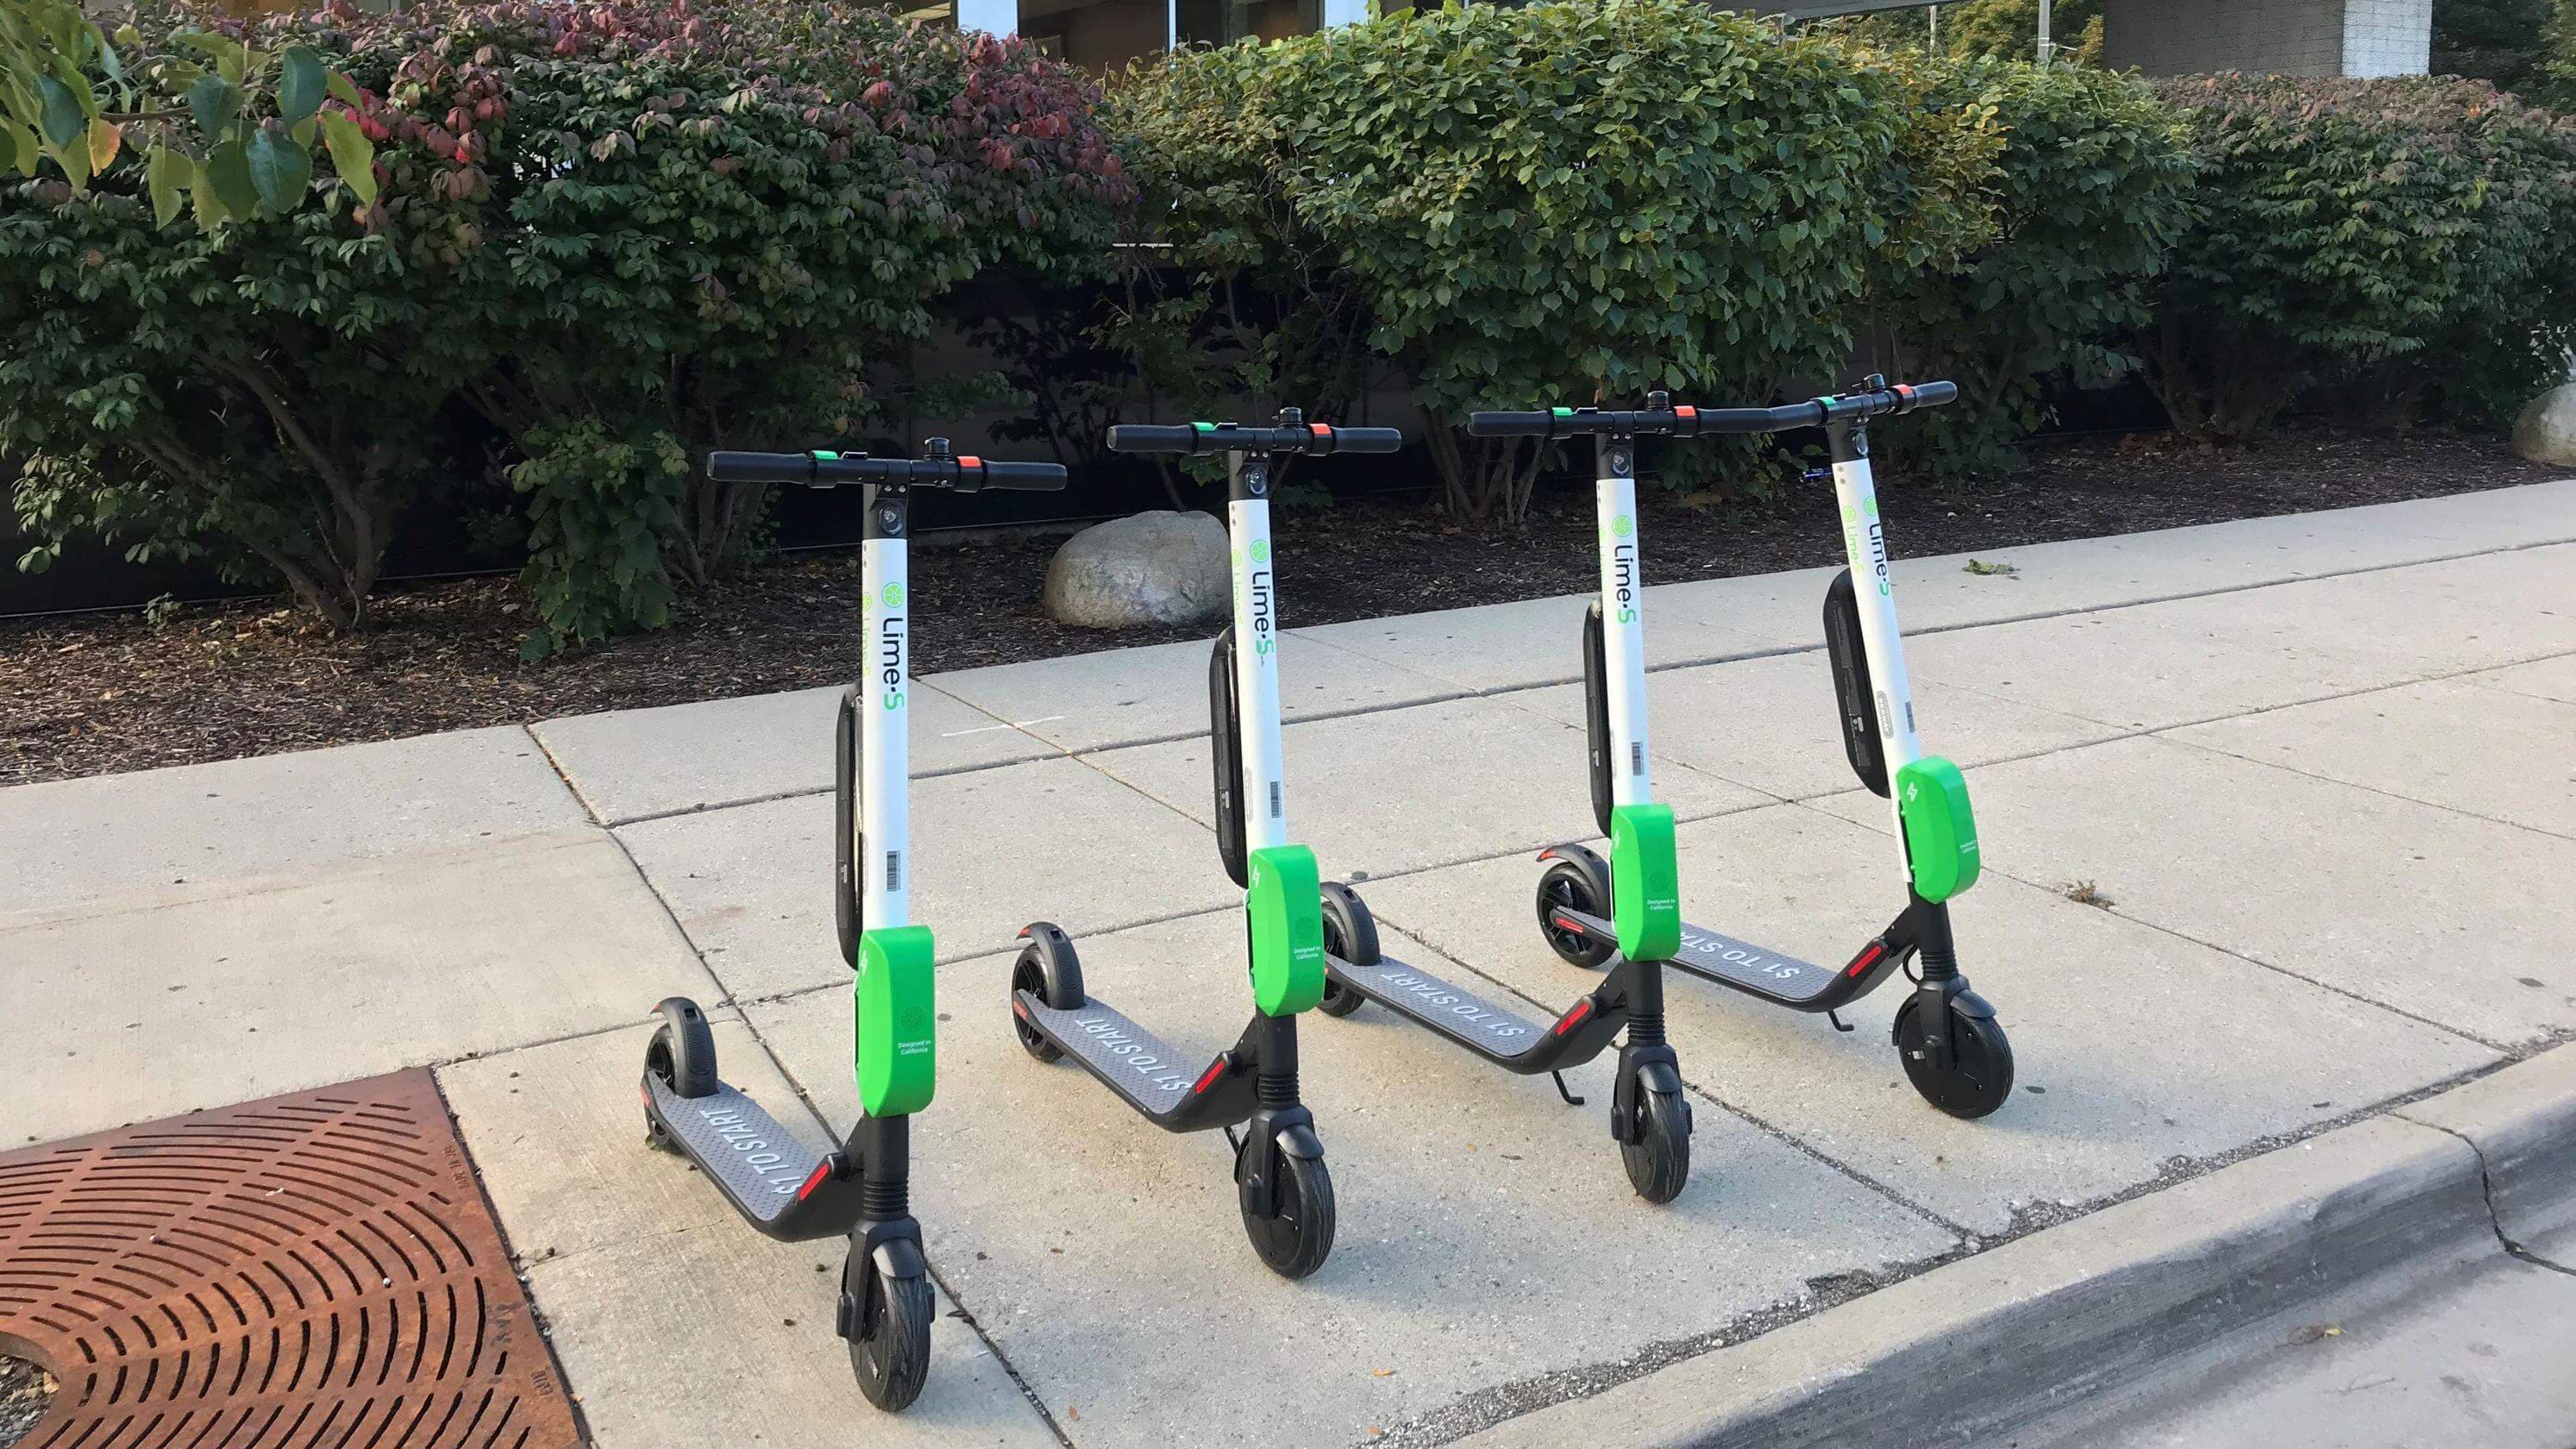 Lime scooters lined up on sidewalk